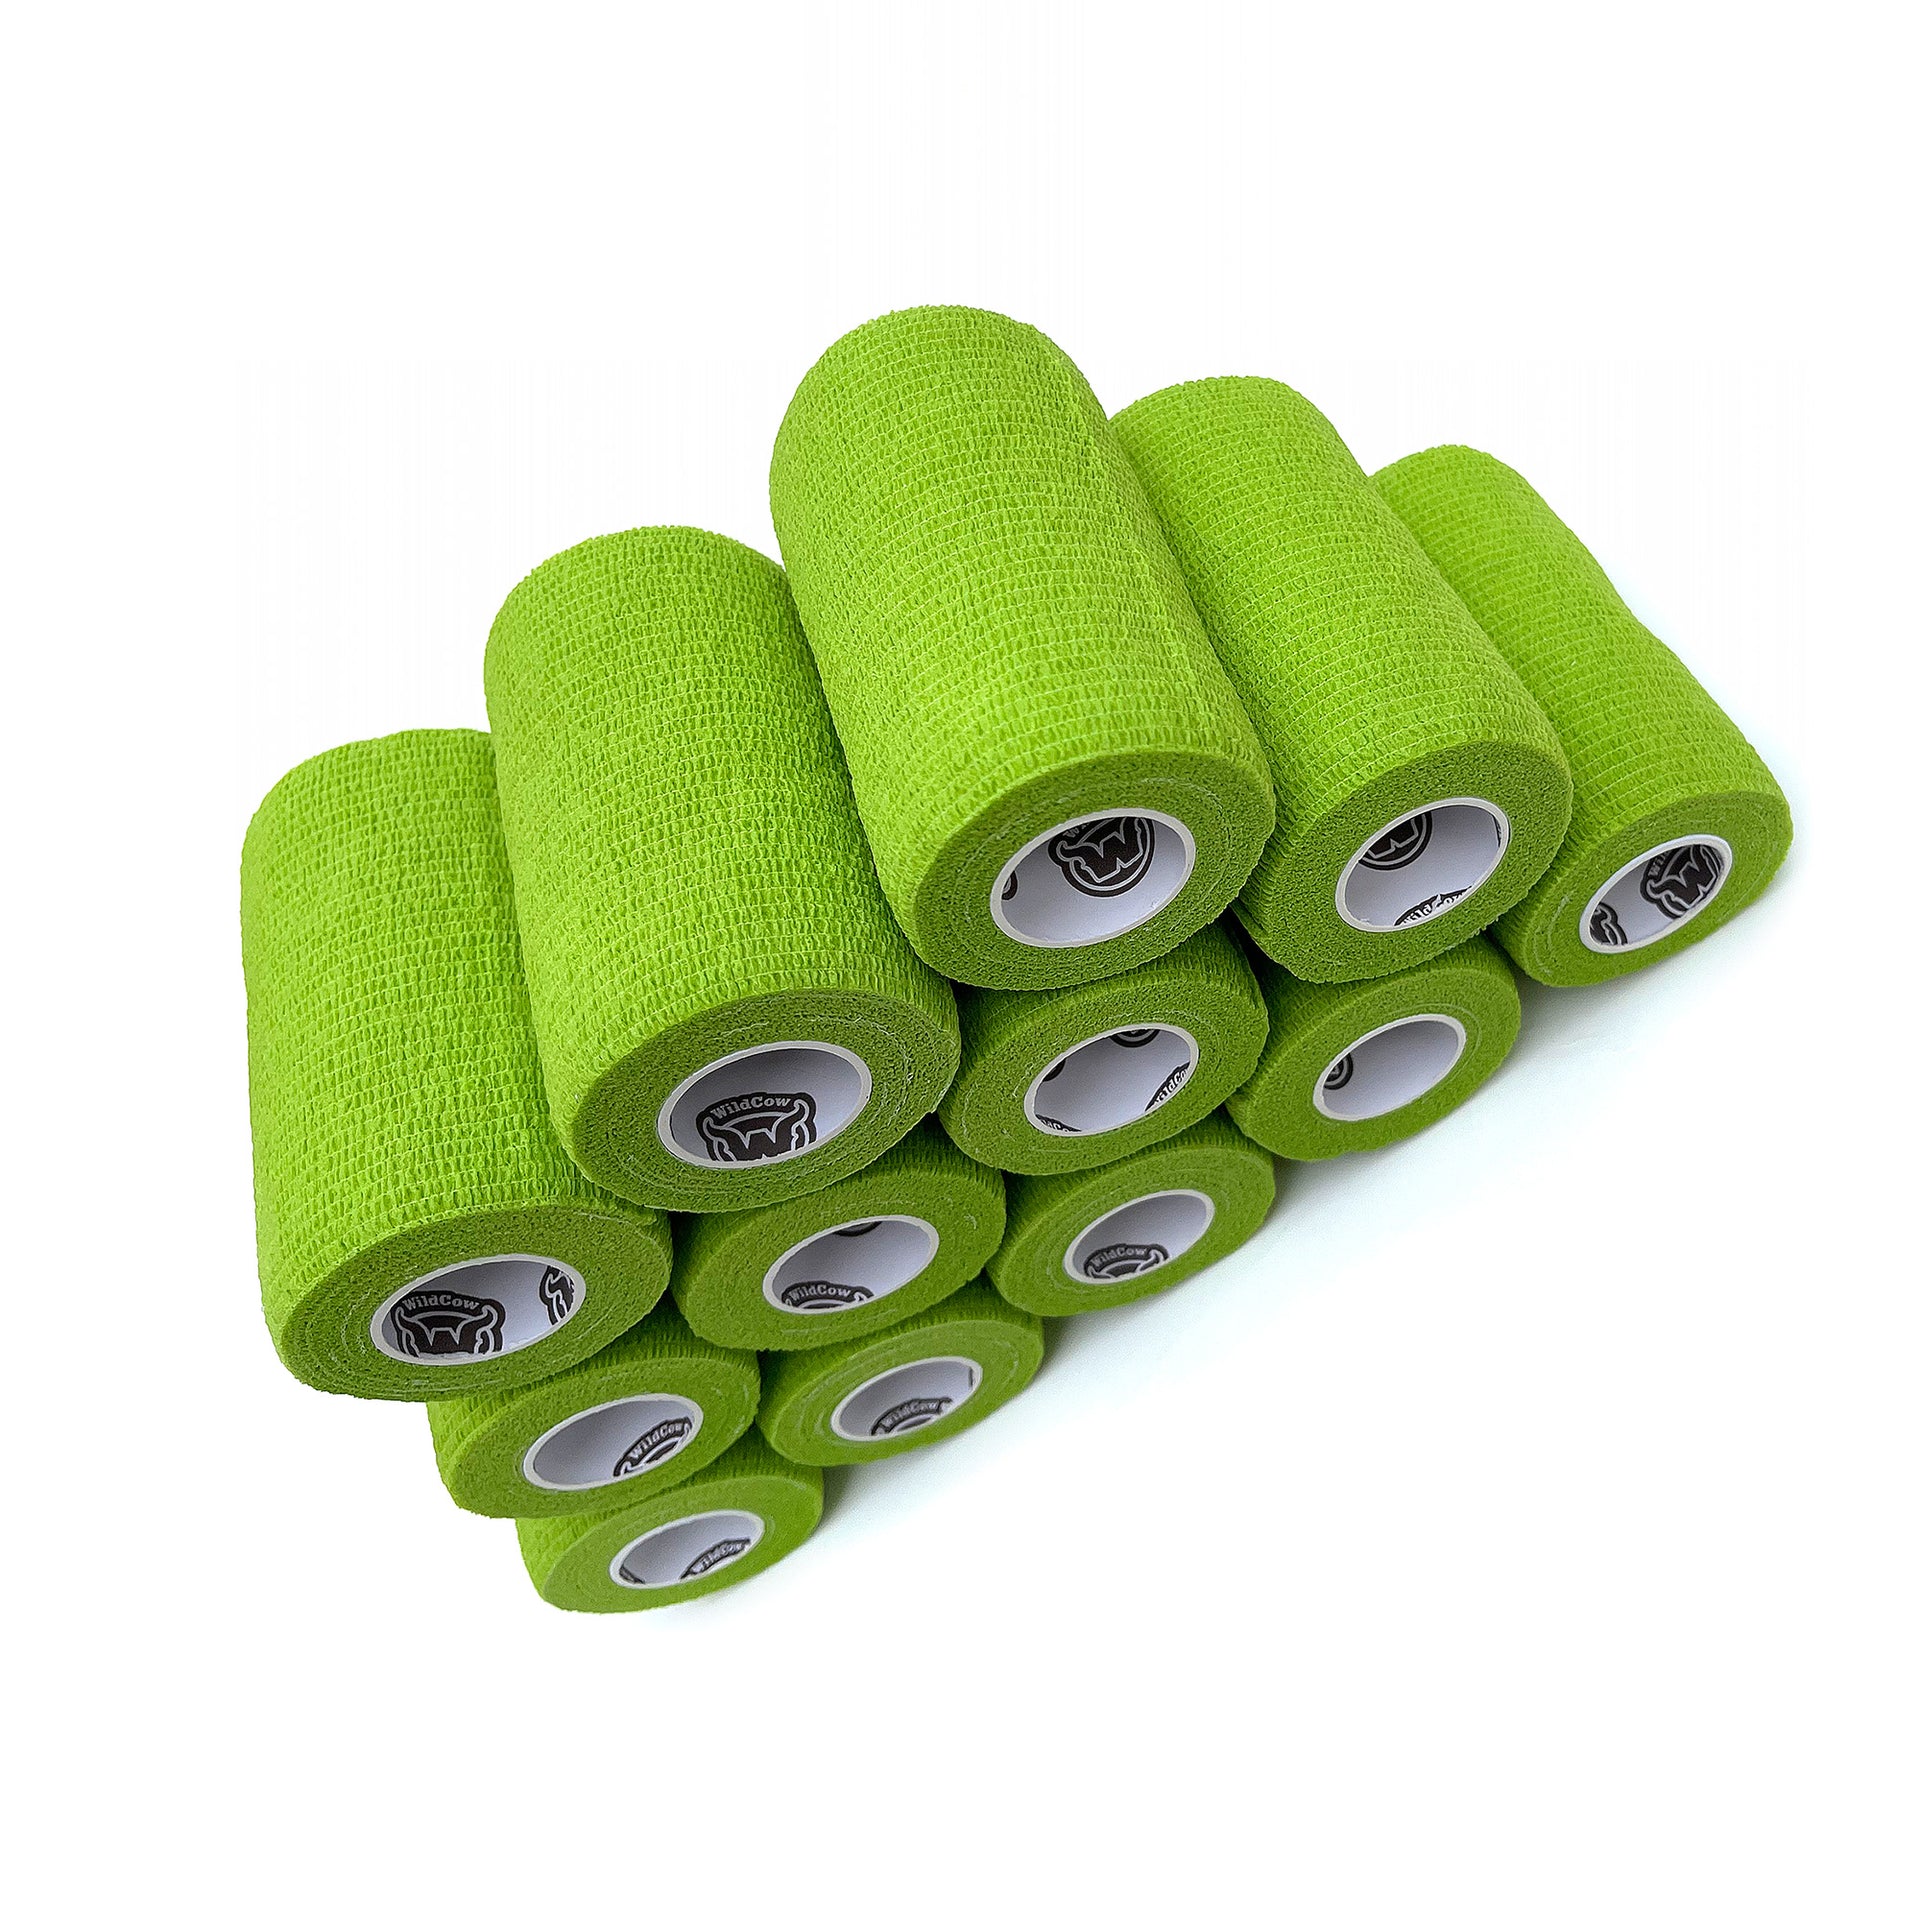 12 Pack of WildCow 4 Inch Grass Green Vet Wrap